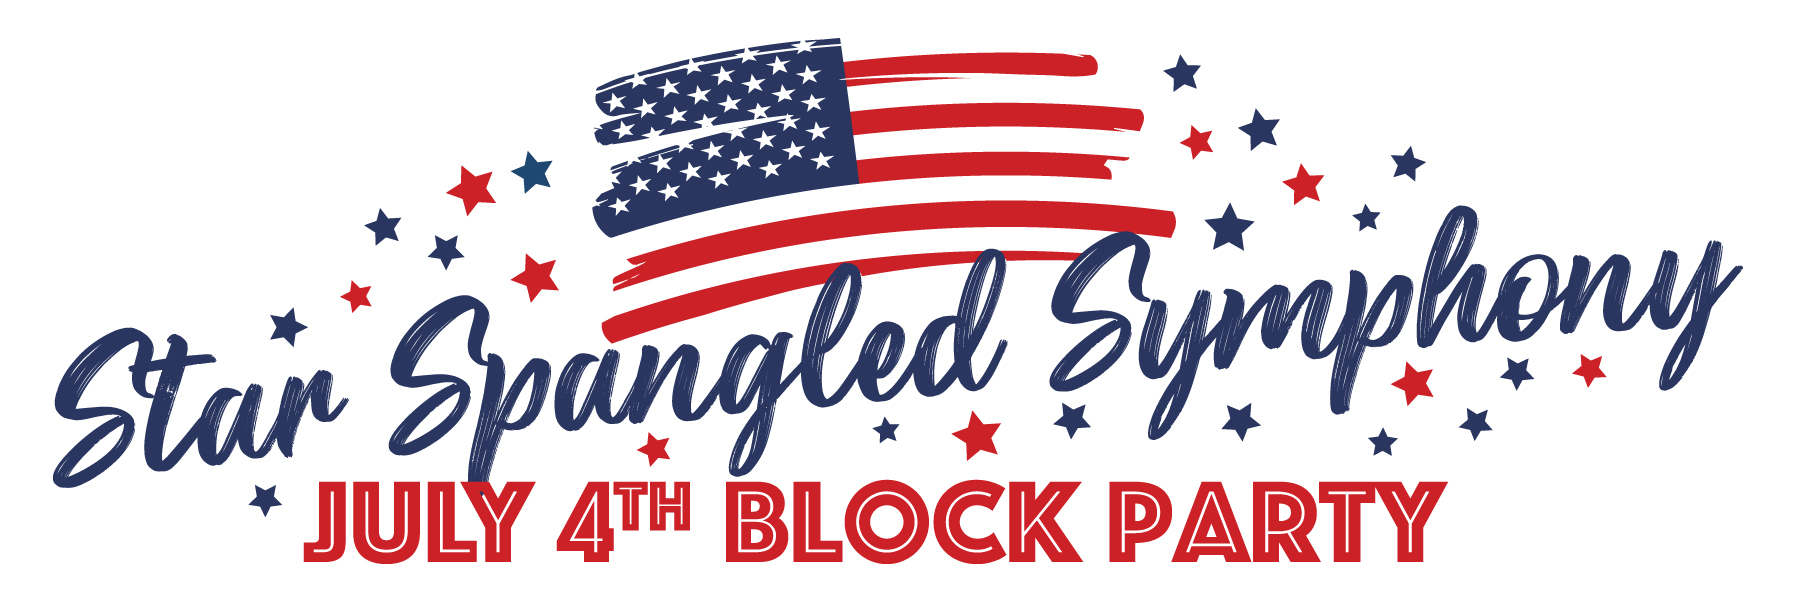 Star Spangled Symphony & July 4th Block Party presented by Colorado Springs Sports Corporation at ,  